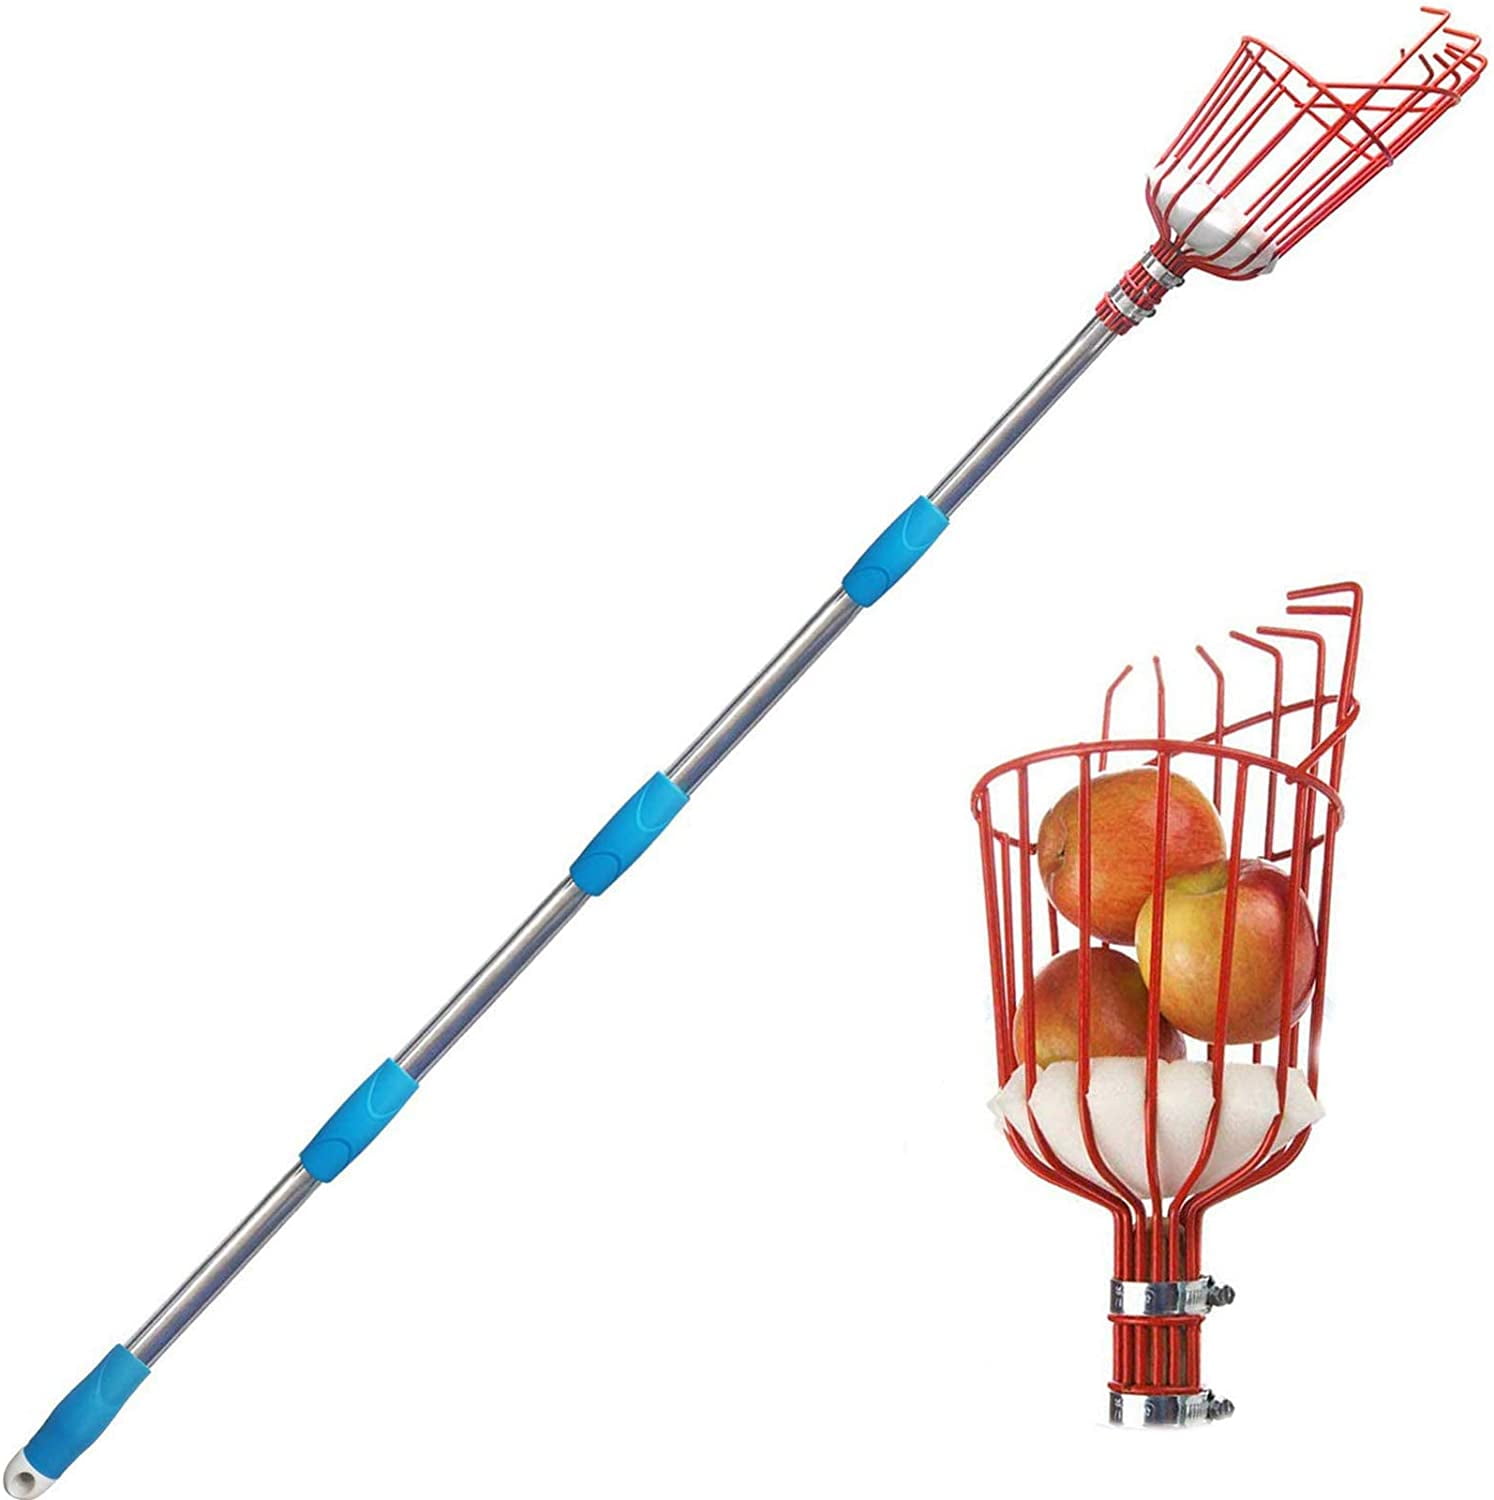 COCONUT Fruit Picker Tool Fruit Picker with Basket and Pole Easy to Assemble 